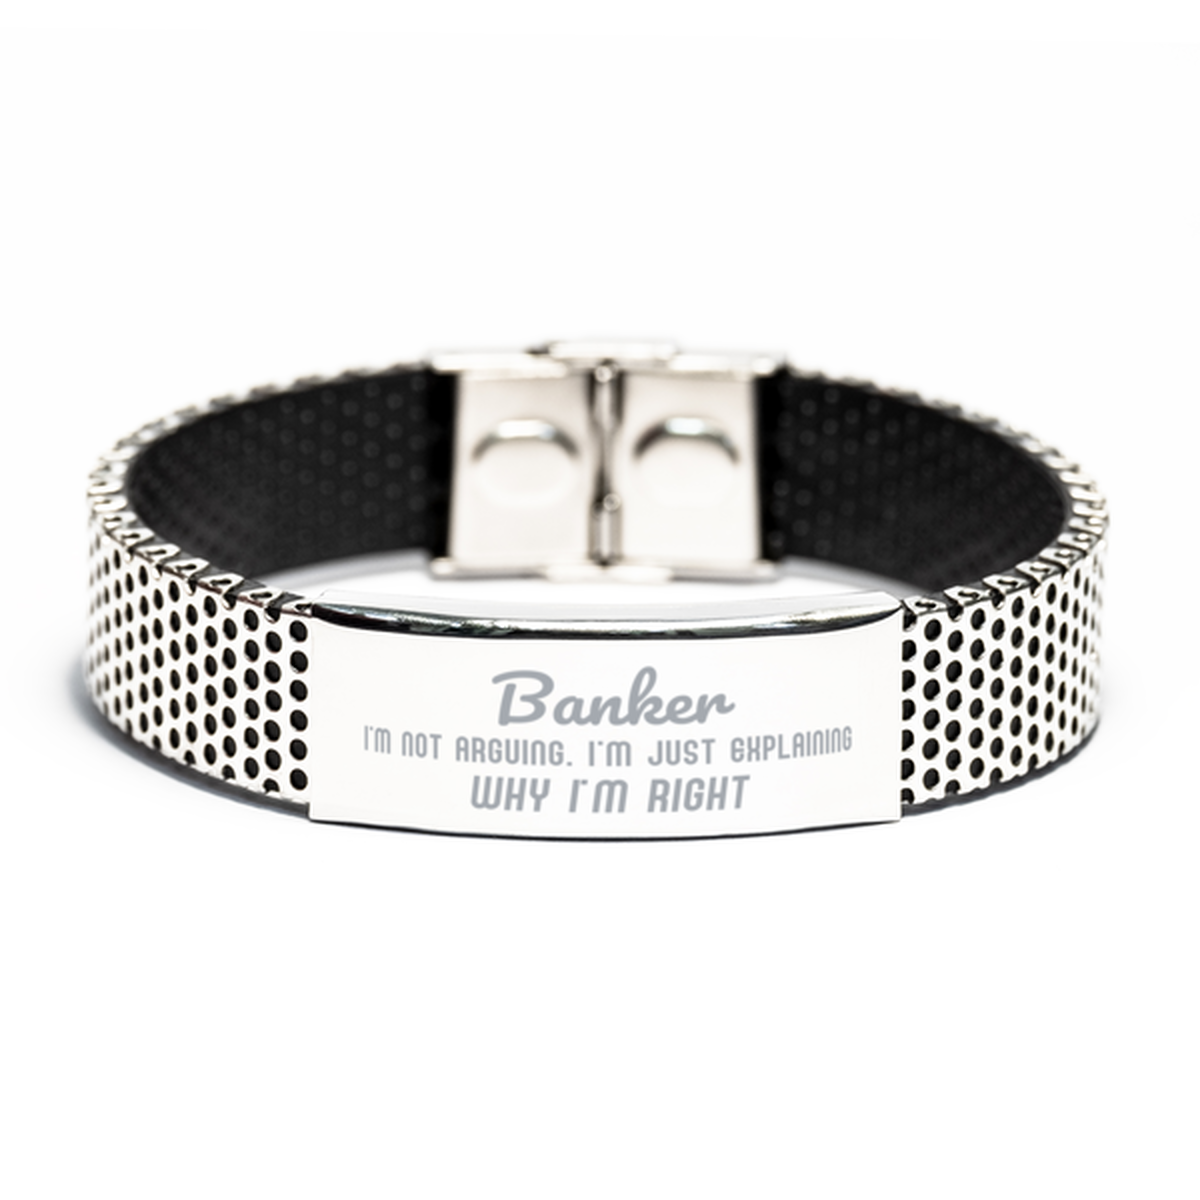 Banker I'm not Arguing. I'm Just Explaining Why I'm RIGHT Stainless Steel Bracelet, Funny Saying Quote Banker Gifts For Banker Graduation Birthday Christmas Gifts for Men Women Coworker